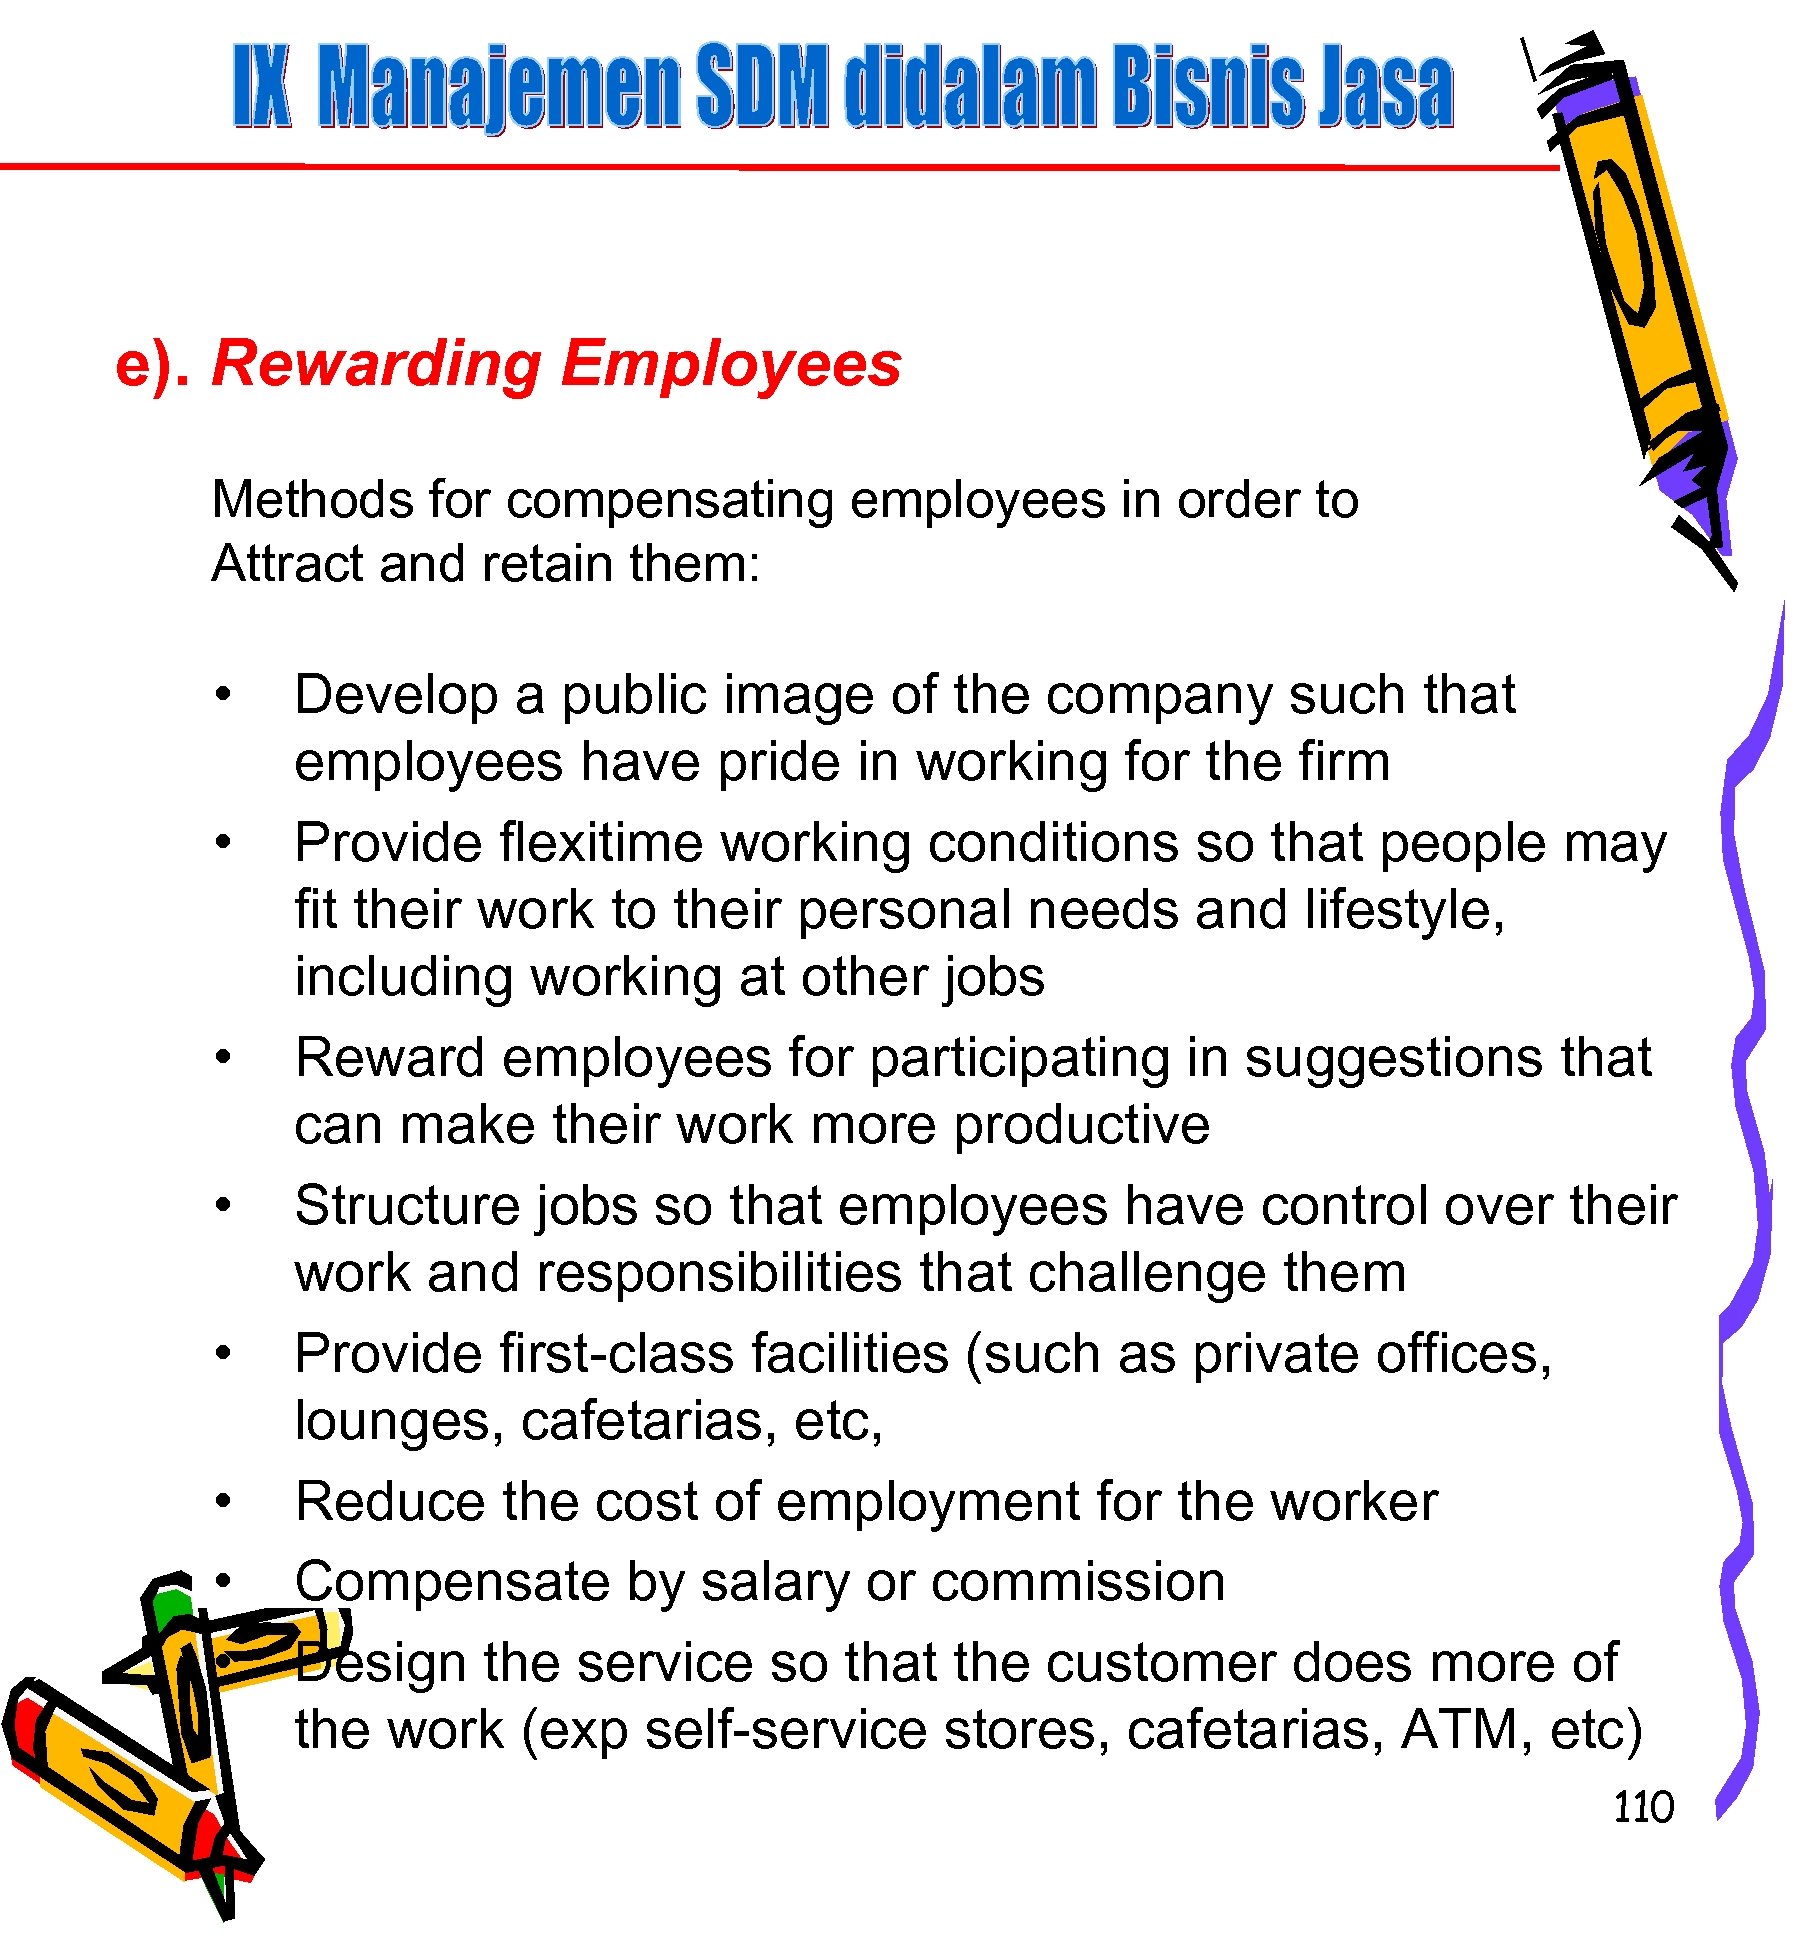 e). Rewarding Employees Methods for compensating employees in order to Attract and retain them: